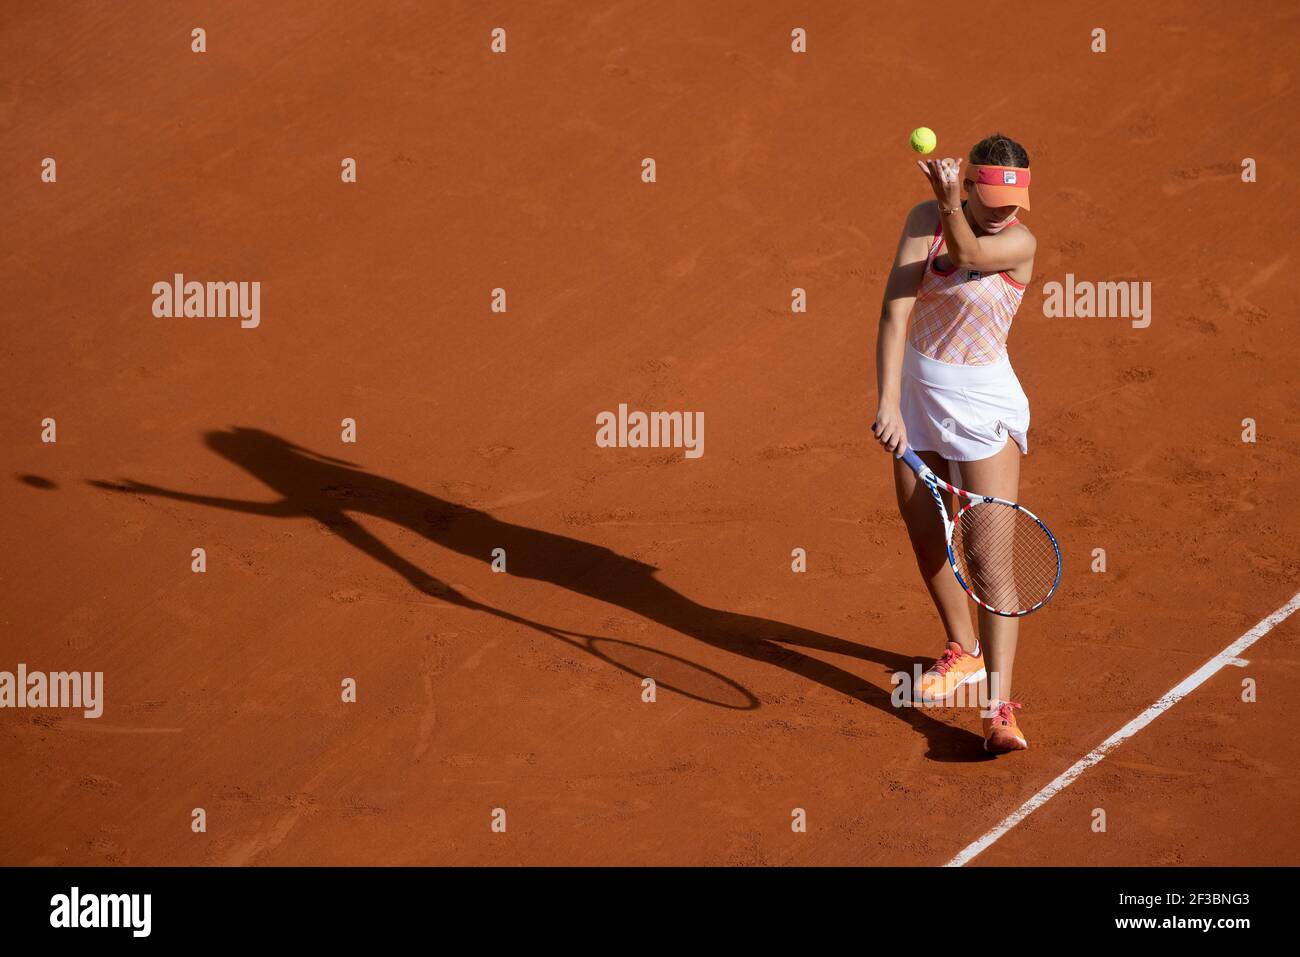 American tennis player Sofia Kenin showing her unusual service action during French Open 2020, Paris, France, Europe. Stock Photo